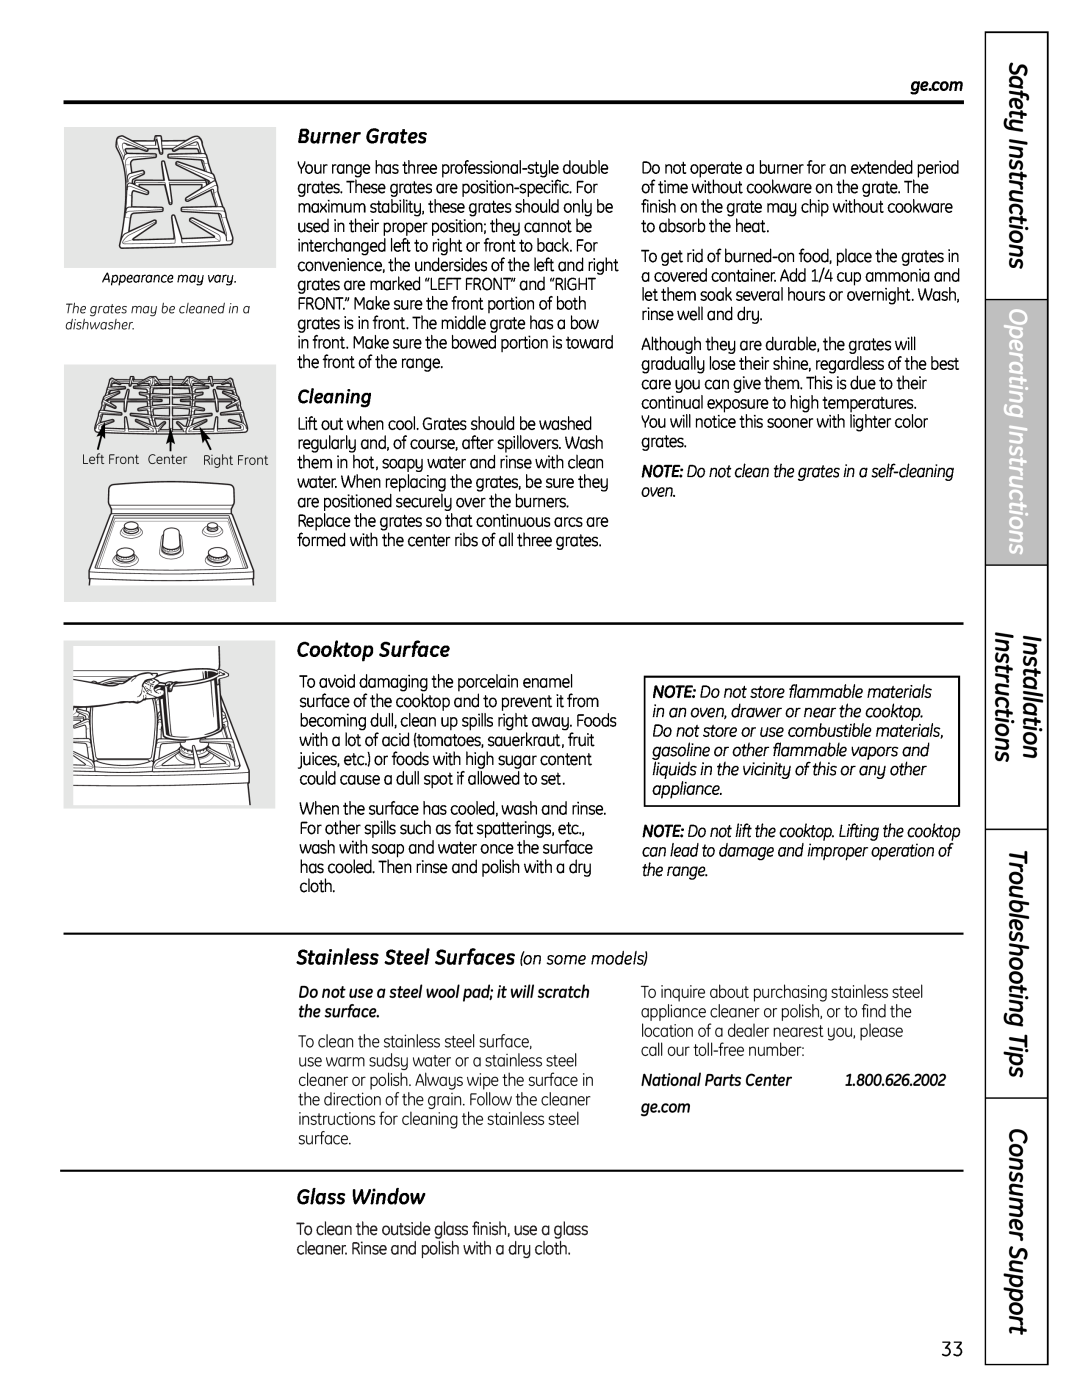 GE P2B918 Safety, Burner Grates, Cooktop Surface, Glass Window, Cleaning, Instructions Operating Instructions, ge.com 